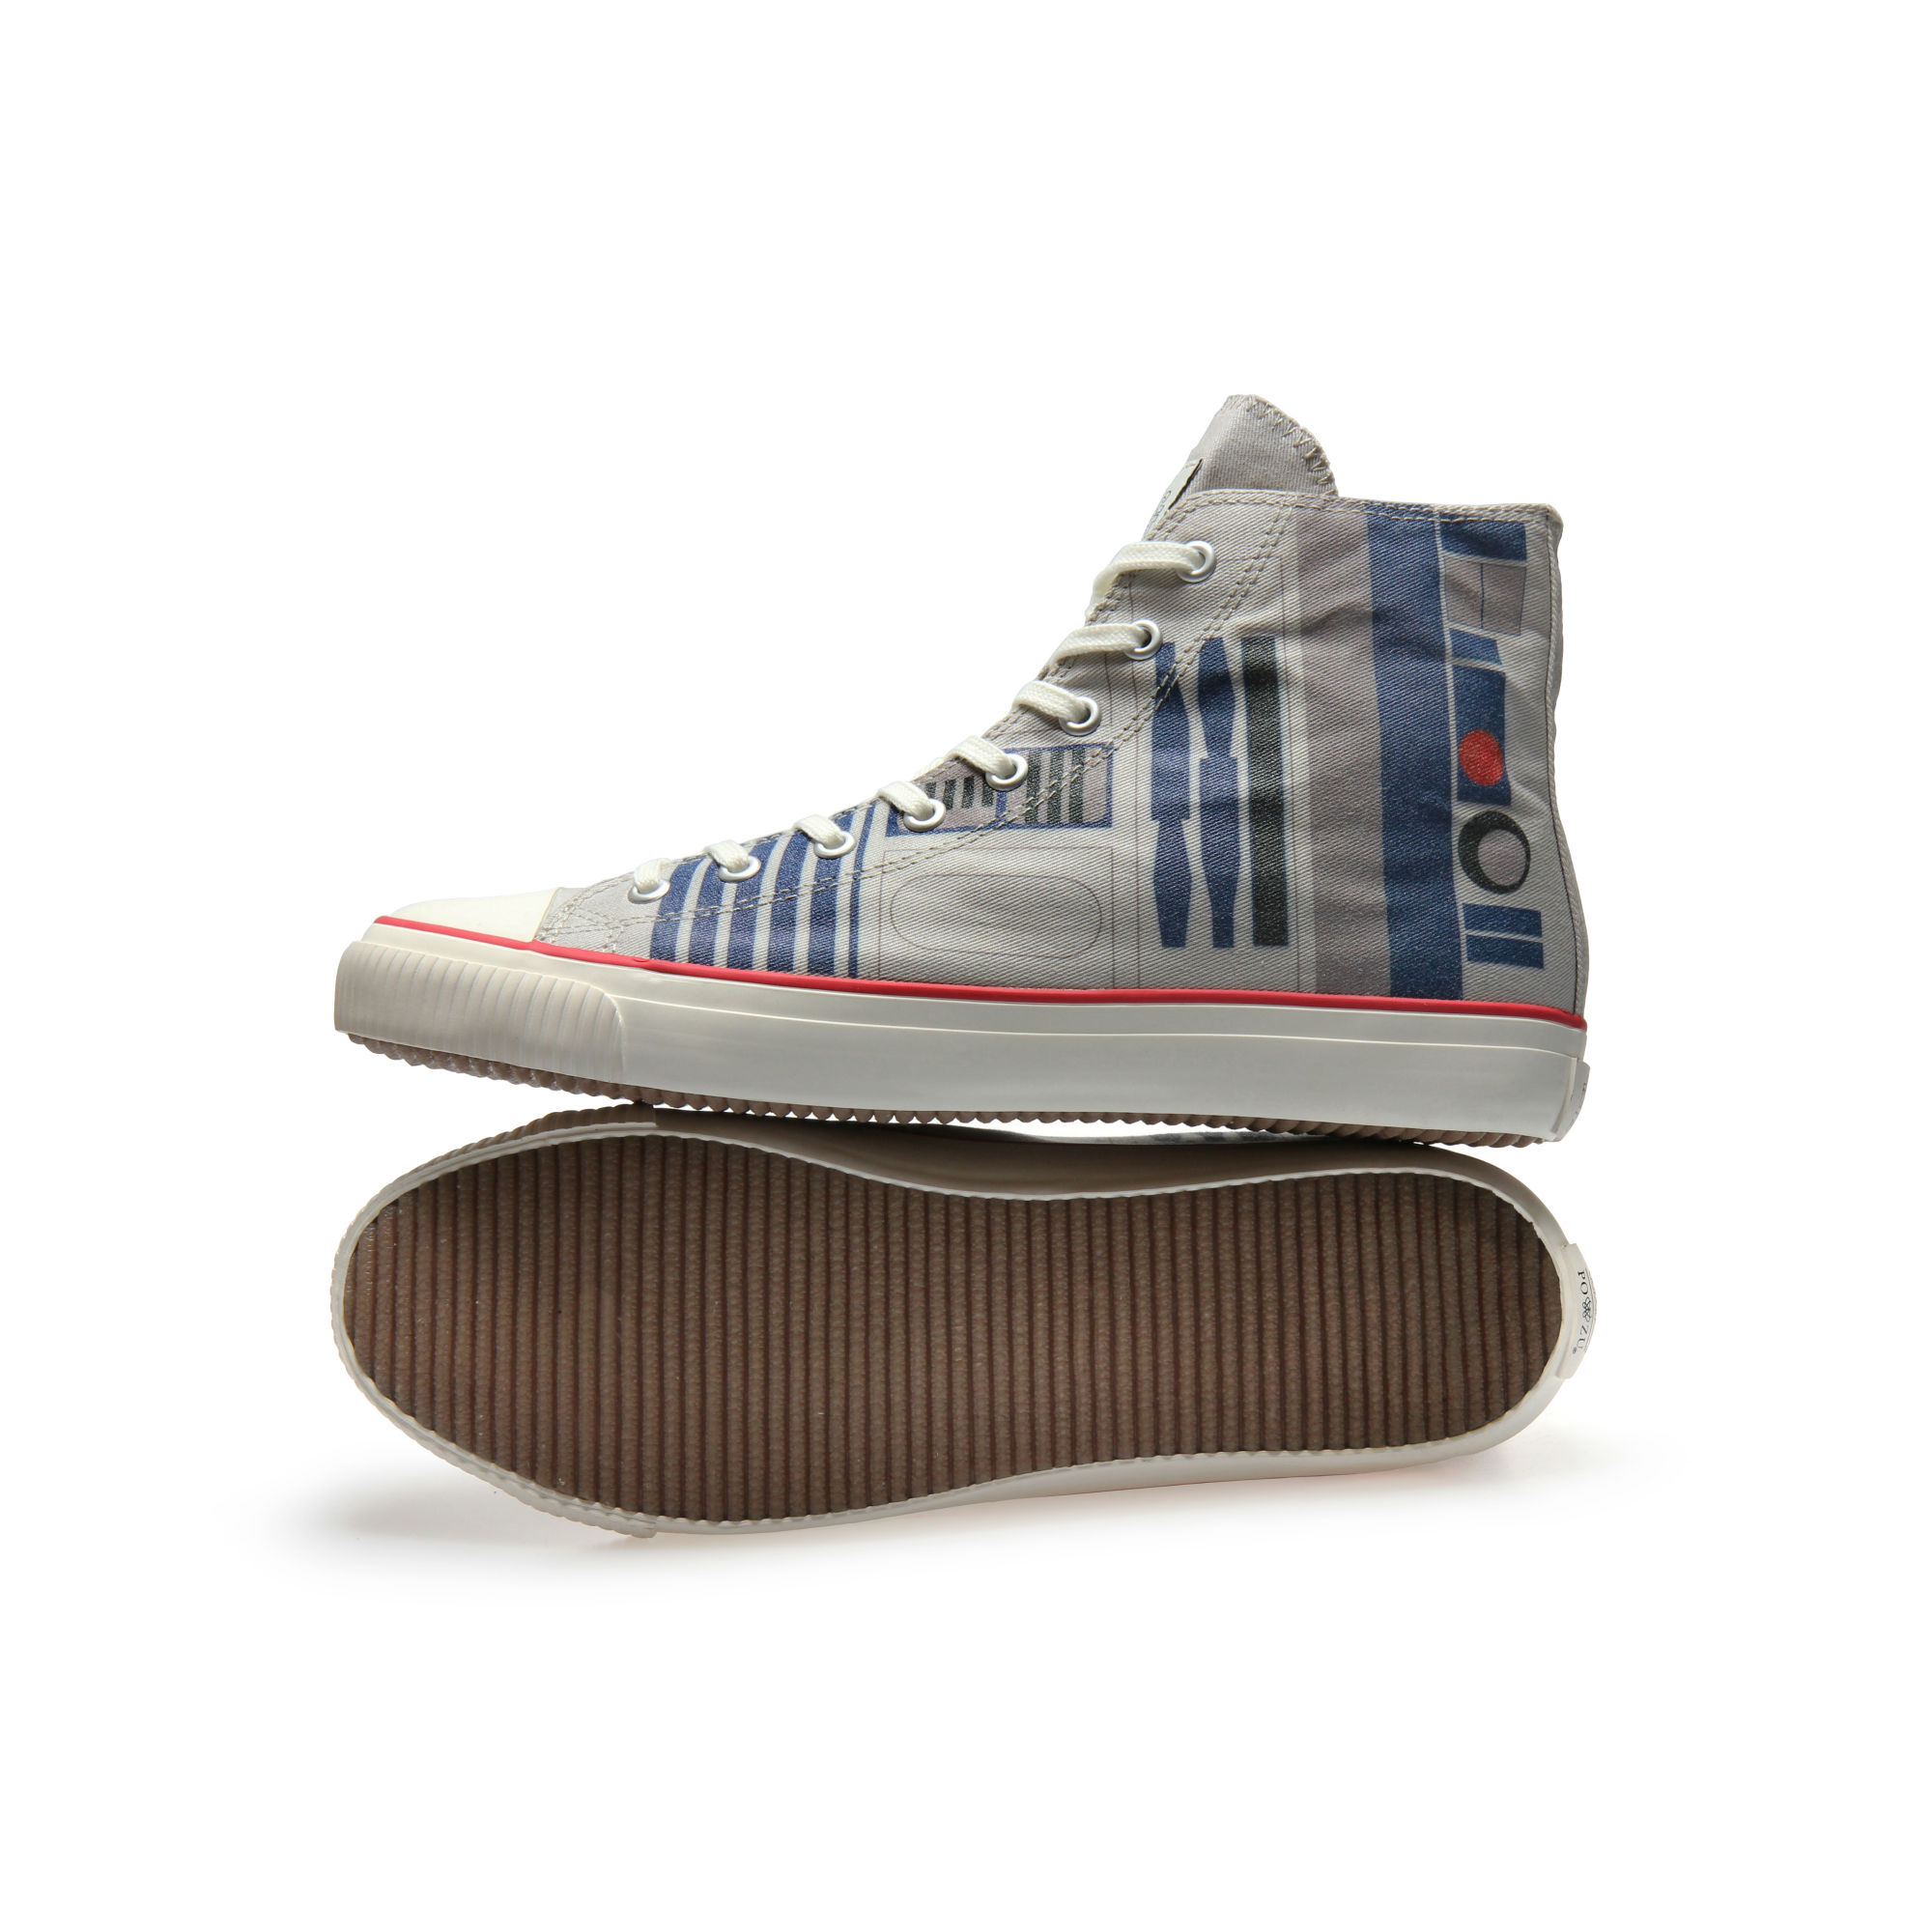 Roll Like A Boss In These Brand New R2-D2 Hightops